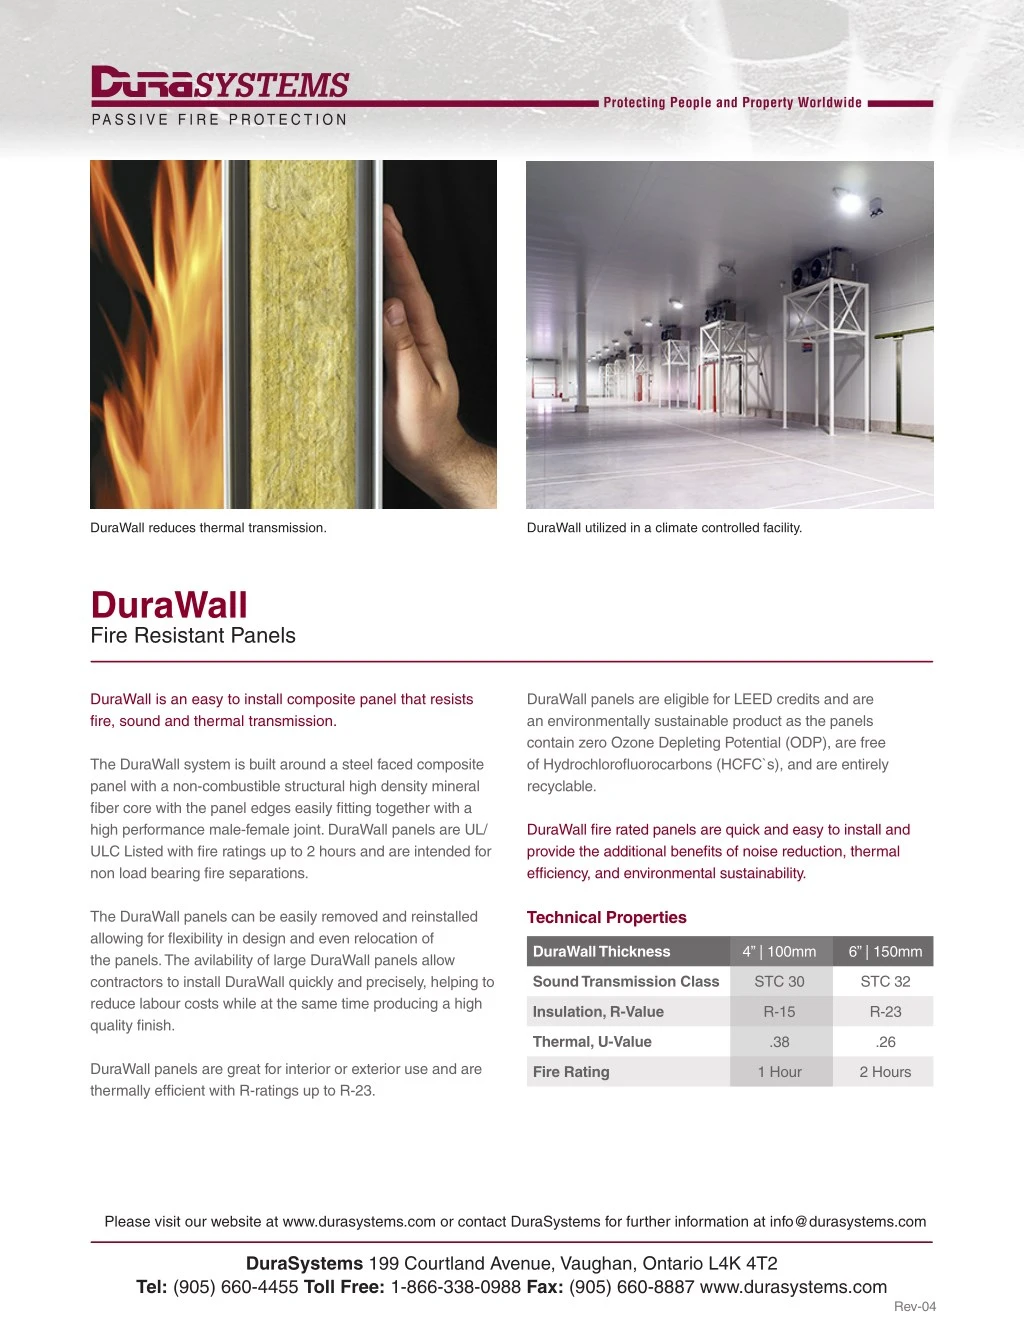 durawall reduces thermal transmission